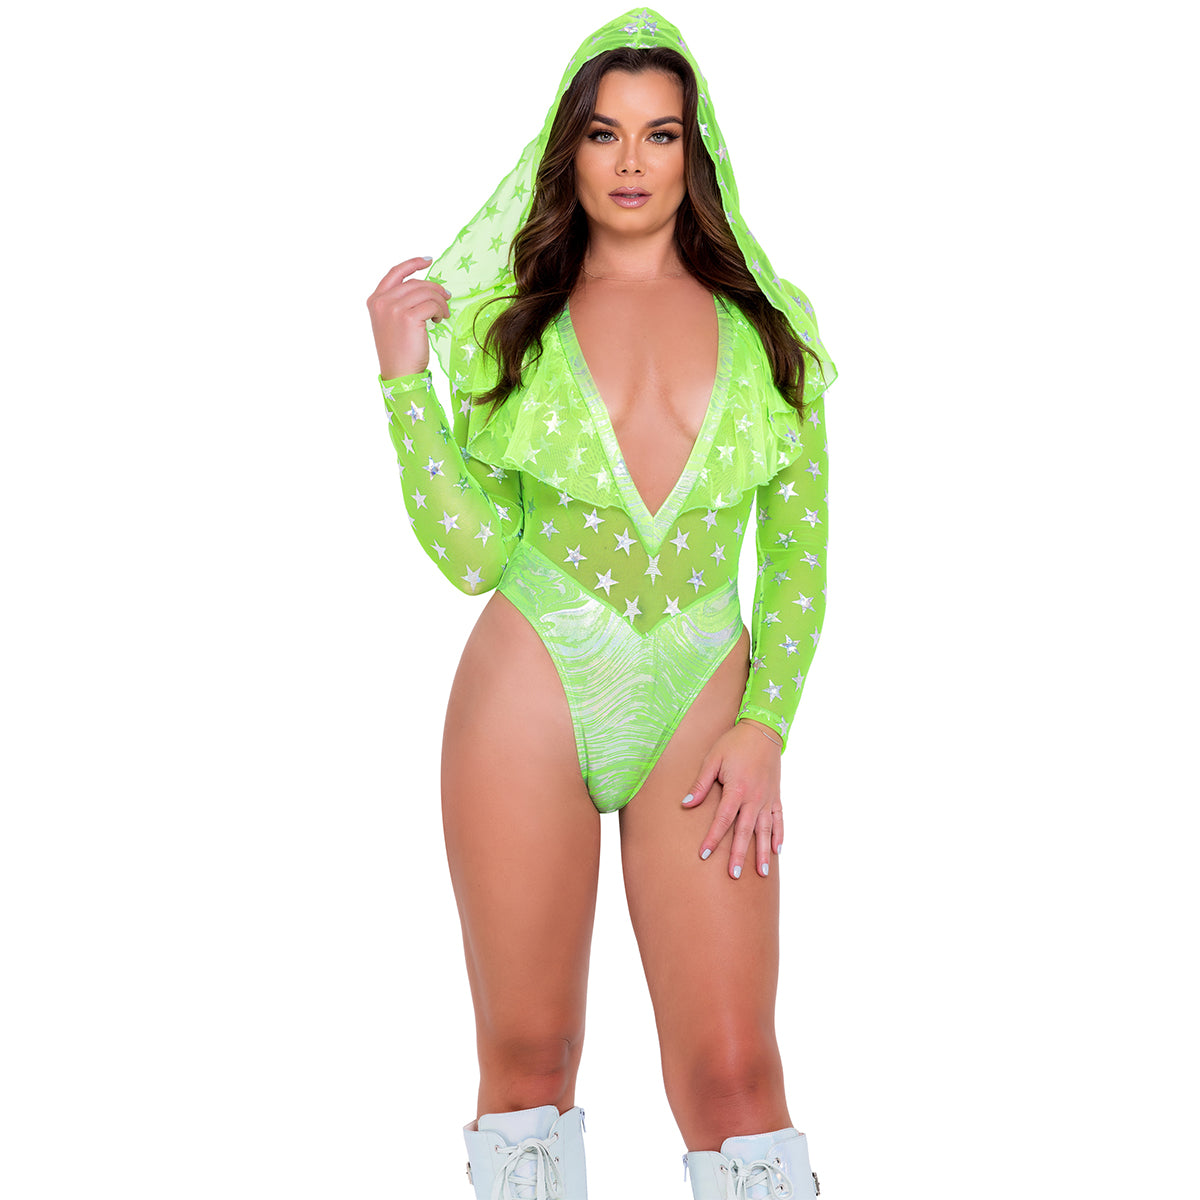 Mesh Two Toned Romper in Neon Green 6085 front view